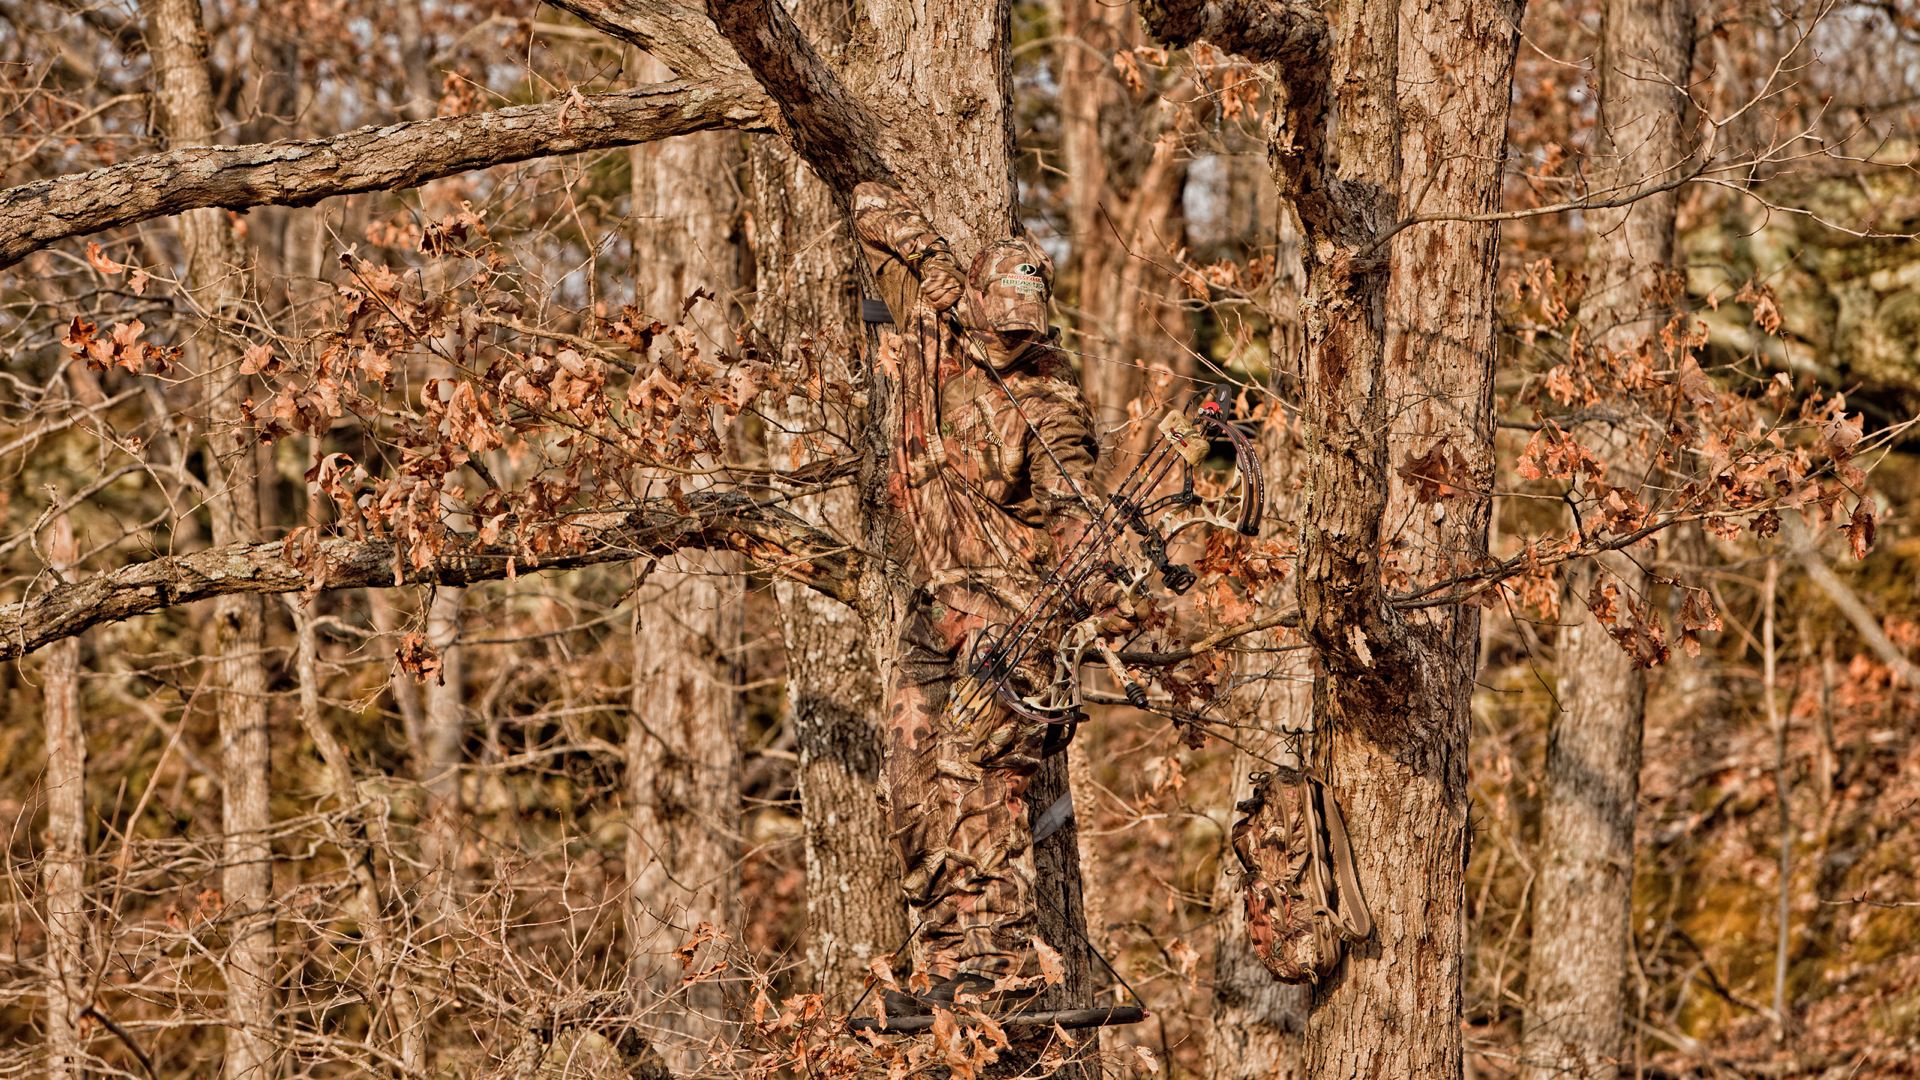 Mossy Oak Camo Patterns Backgrounds Images Pictures   Becuo